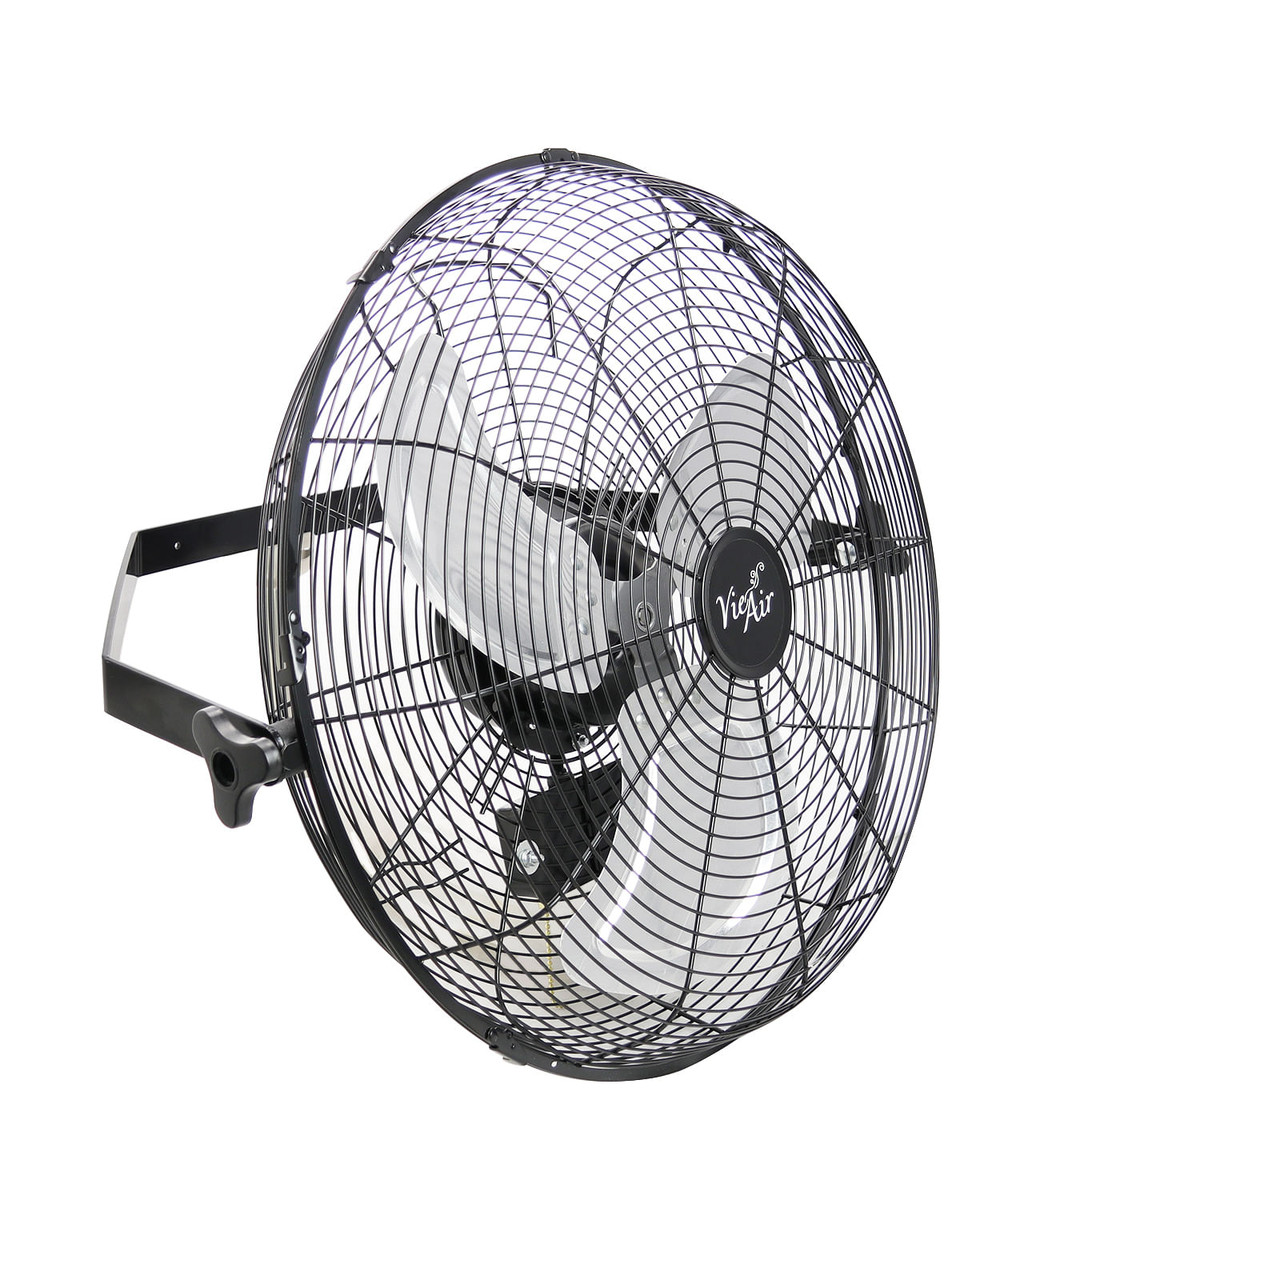 sihed Vie Air Dual Function 18 Inch Wall Mountable Tilting Fan with 3 Speed Motor in Black